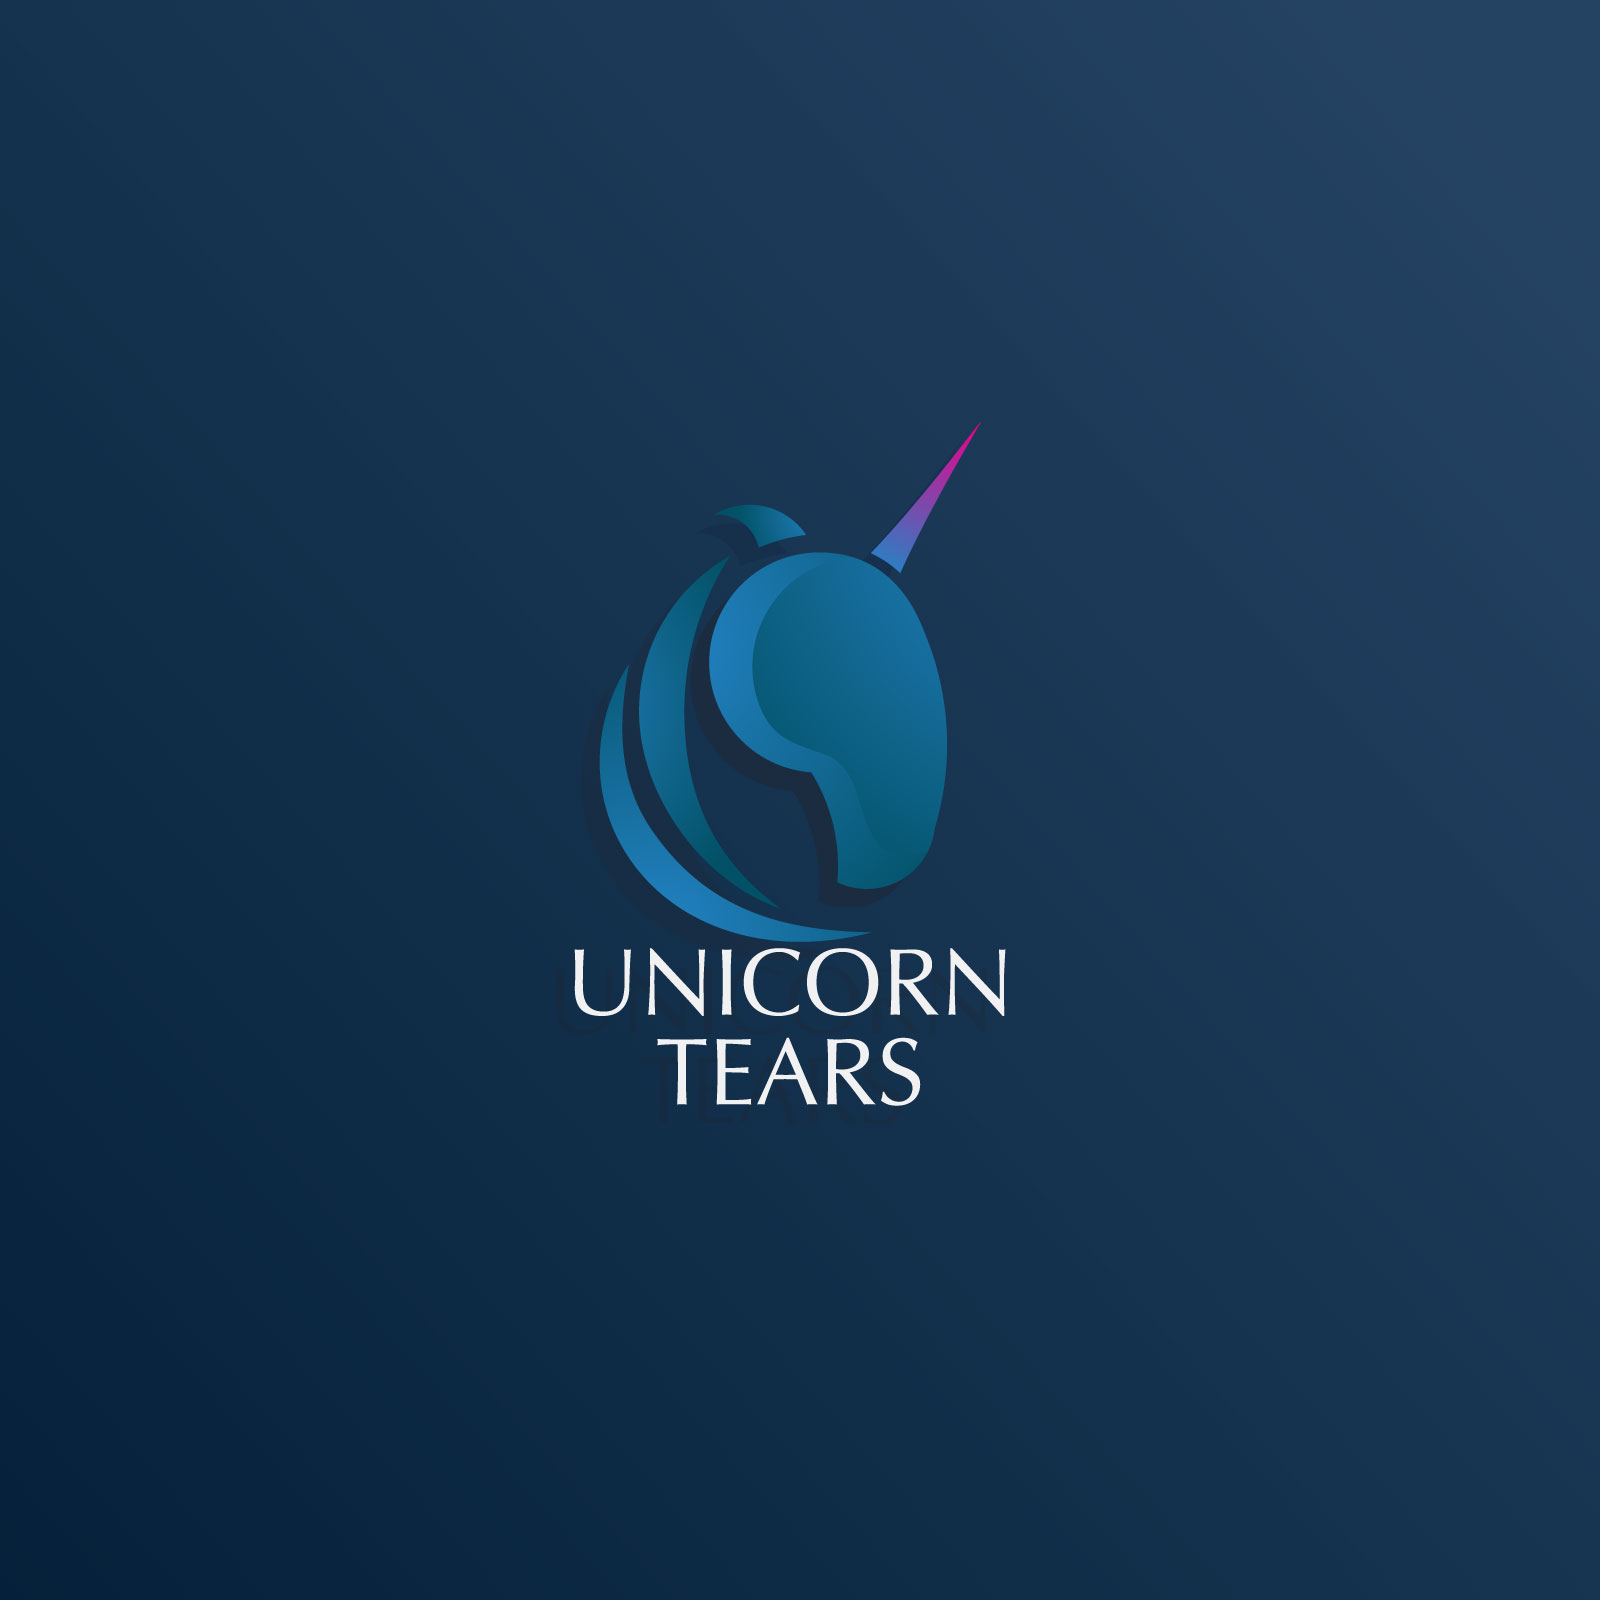 Unicorn Tears Logo Design
  
  <p>CONCEPT: Design Logo for a water brand using 5 sense as inspiration</p>
  <p>HOW DESIGN SOLVES PROBLEMS: Using the Golden Ratio as a proportion guide and compositional tool.</p>
  <p>PROCESS: : sketching in sketchbook</p>
  <p>TOOLS USED: pen/paper Illustrator</p>
  <p>CHALLENGES:  Creating a logo without making the unicorn appear sad with tears, which could push away the target audience.</p>